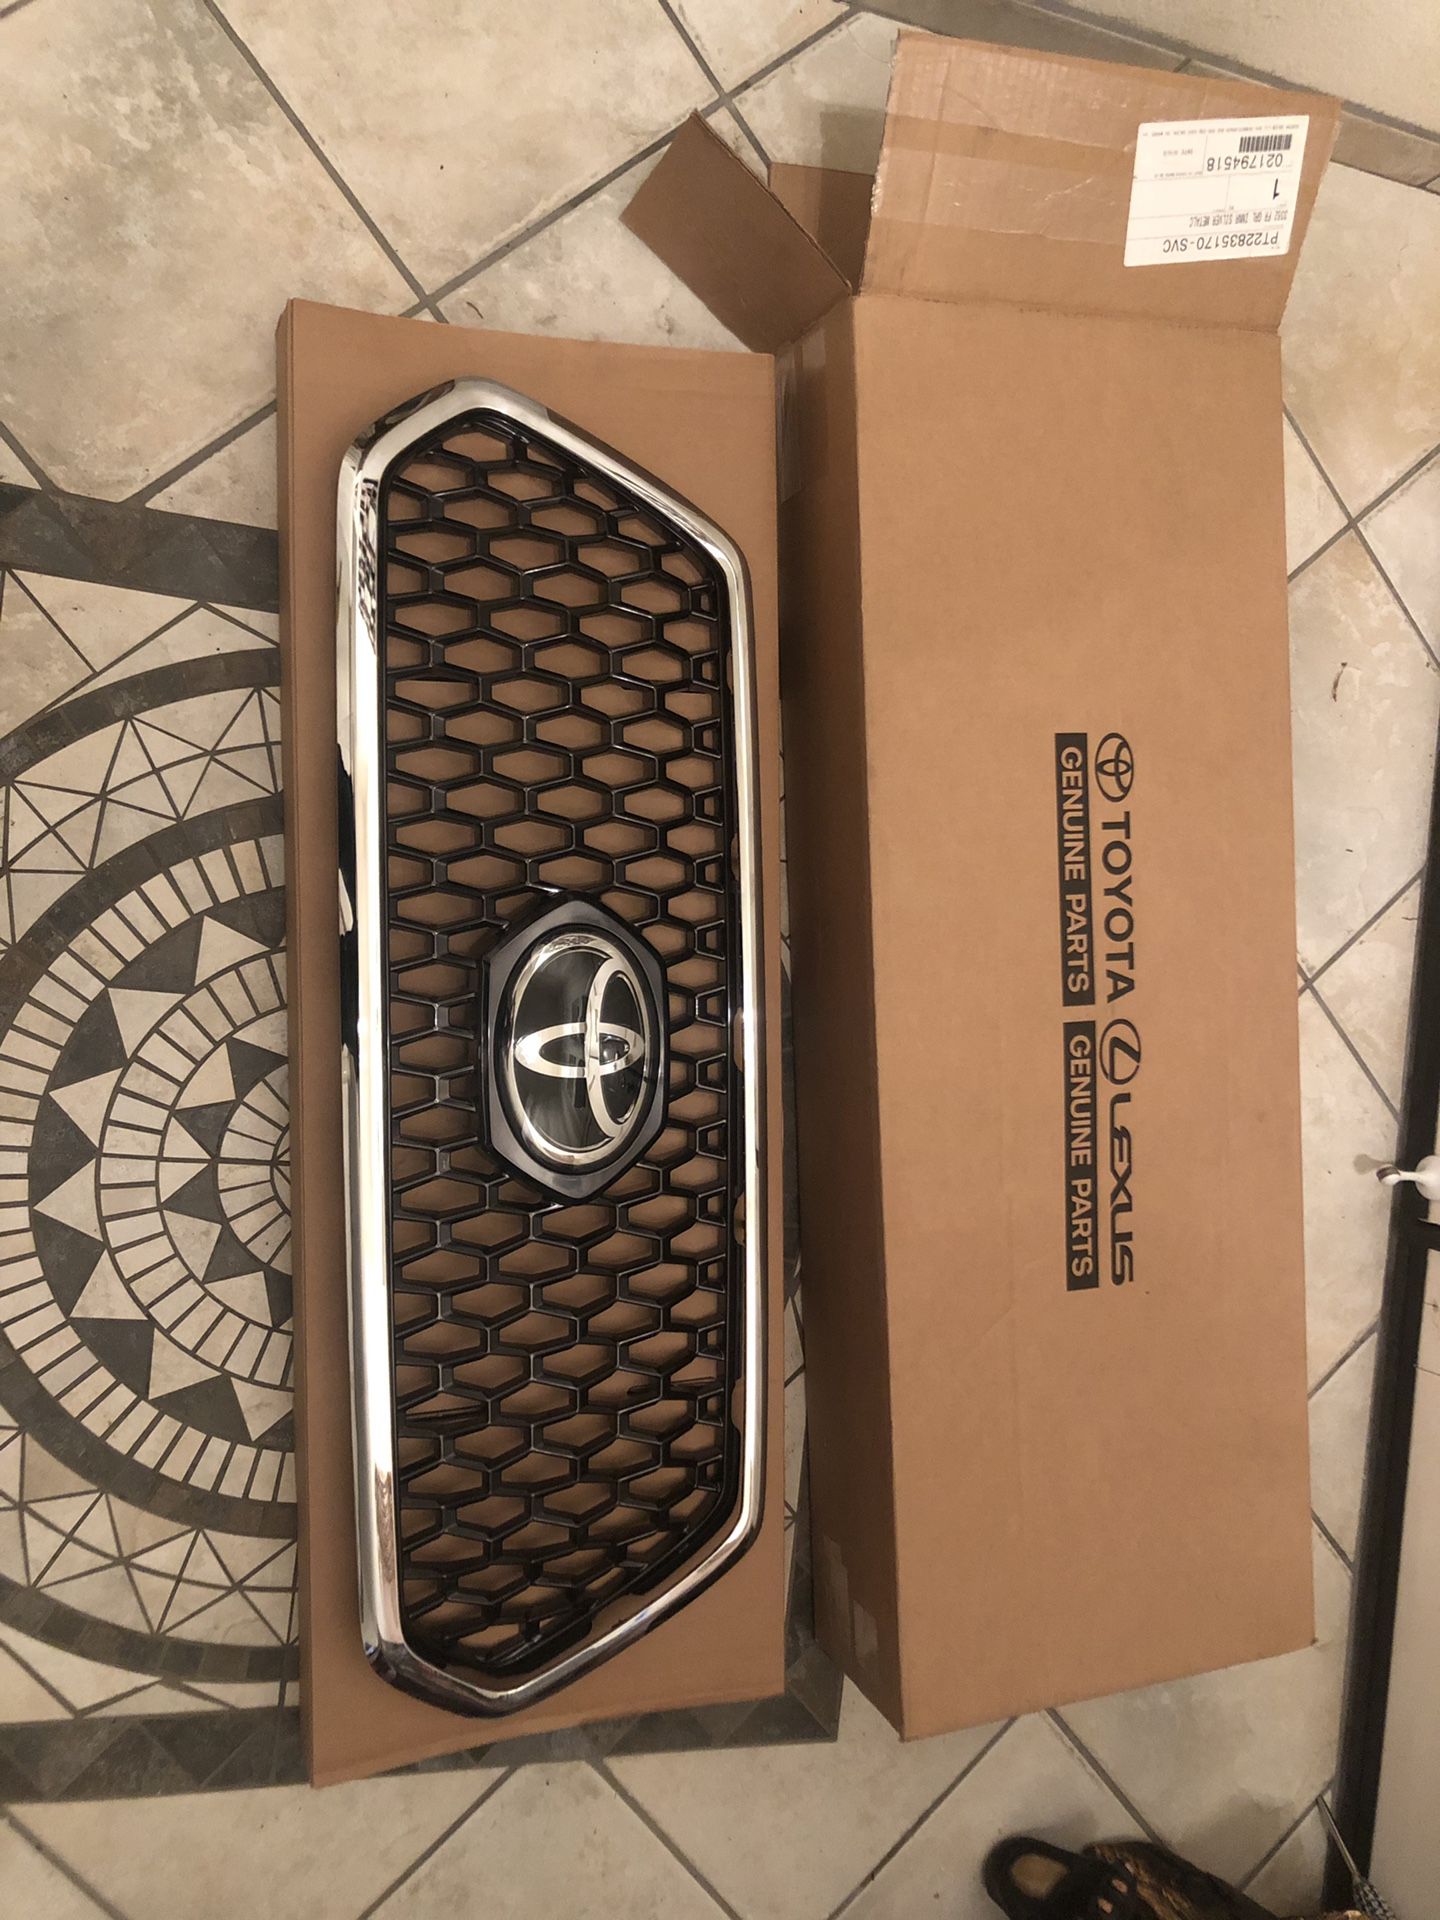 2019 Toyota Tacoma stock front grill